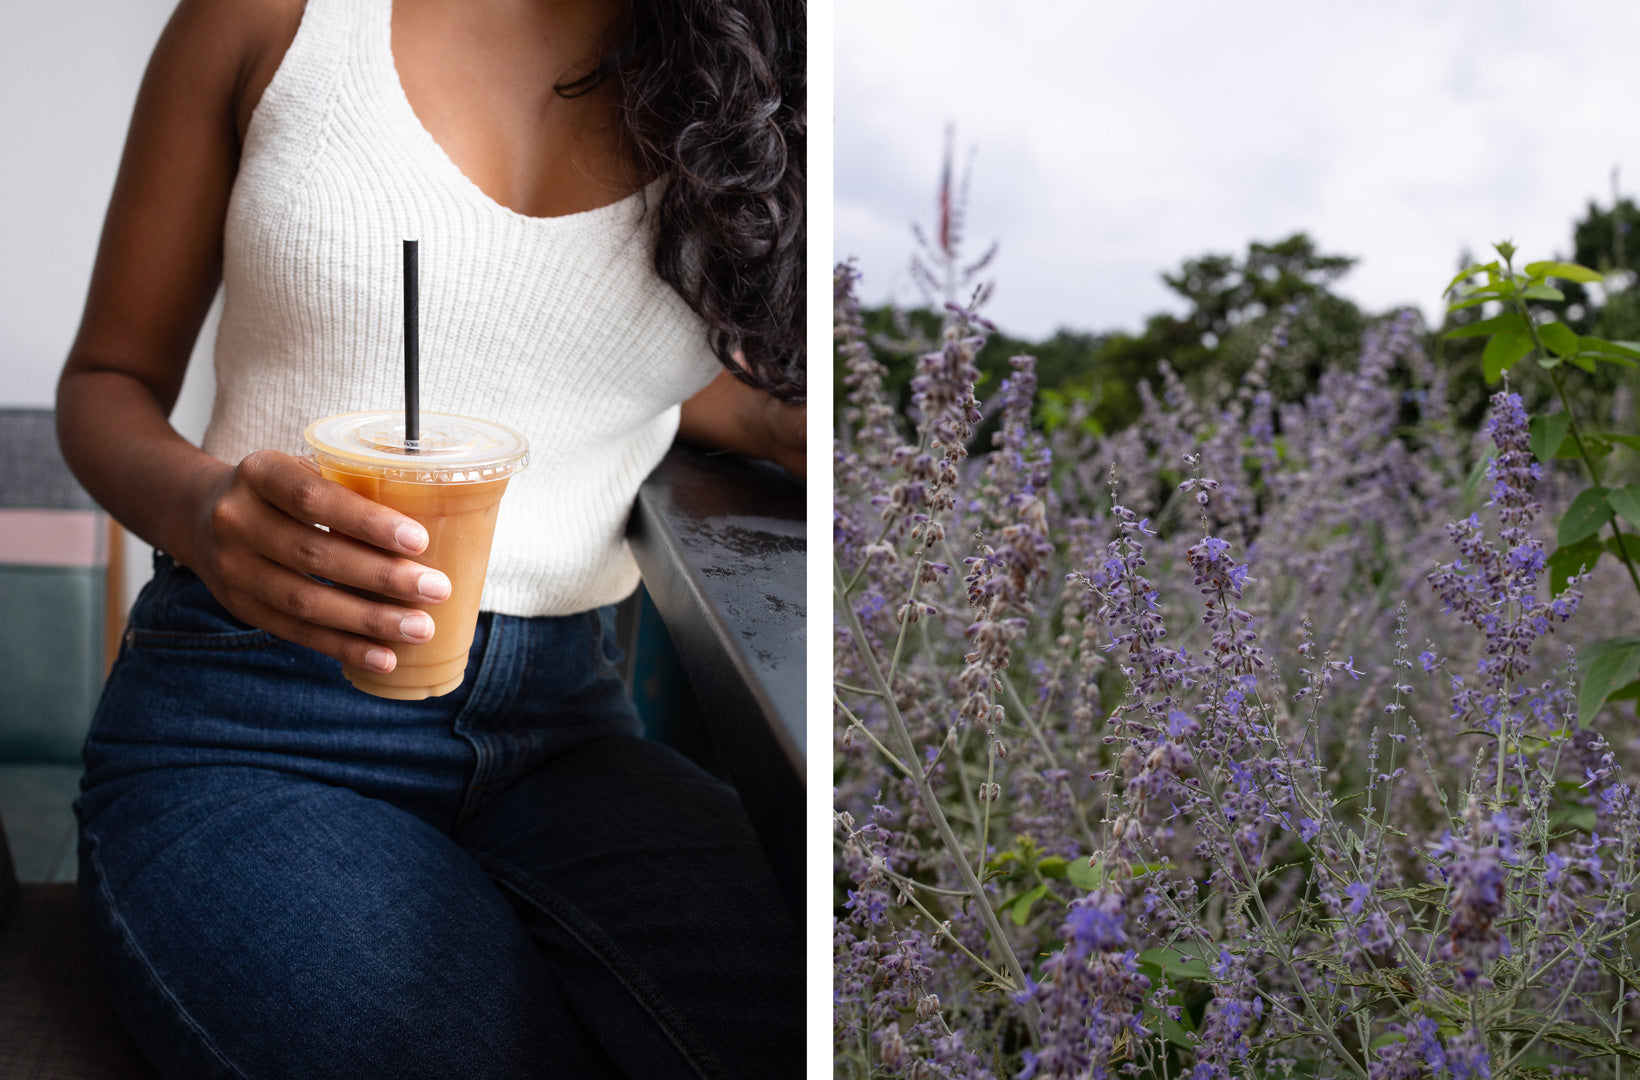 Left image shows a woman's torso and right arm. She is wearing a cream rib knit tank top and holds an iced coffee in her right hand. The left image shows a field of purple wildflowers.